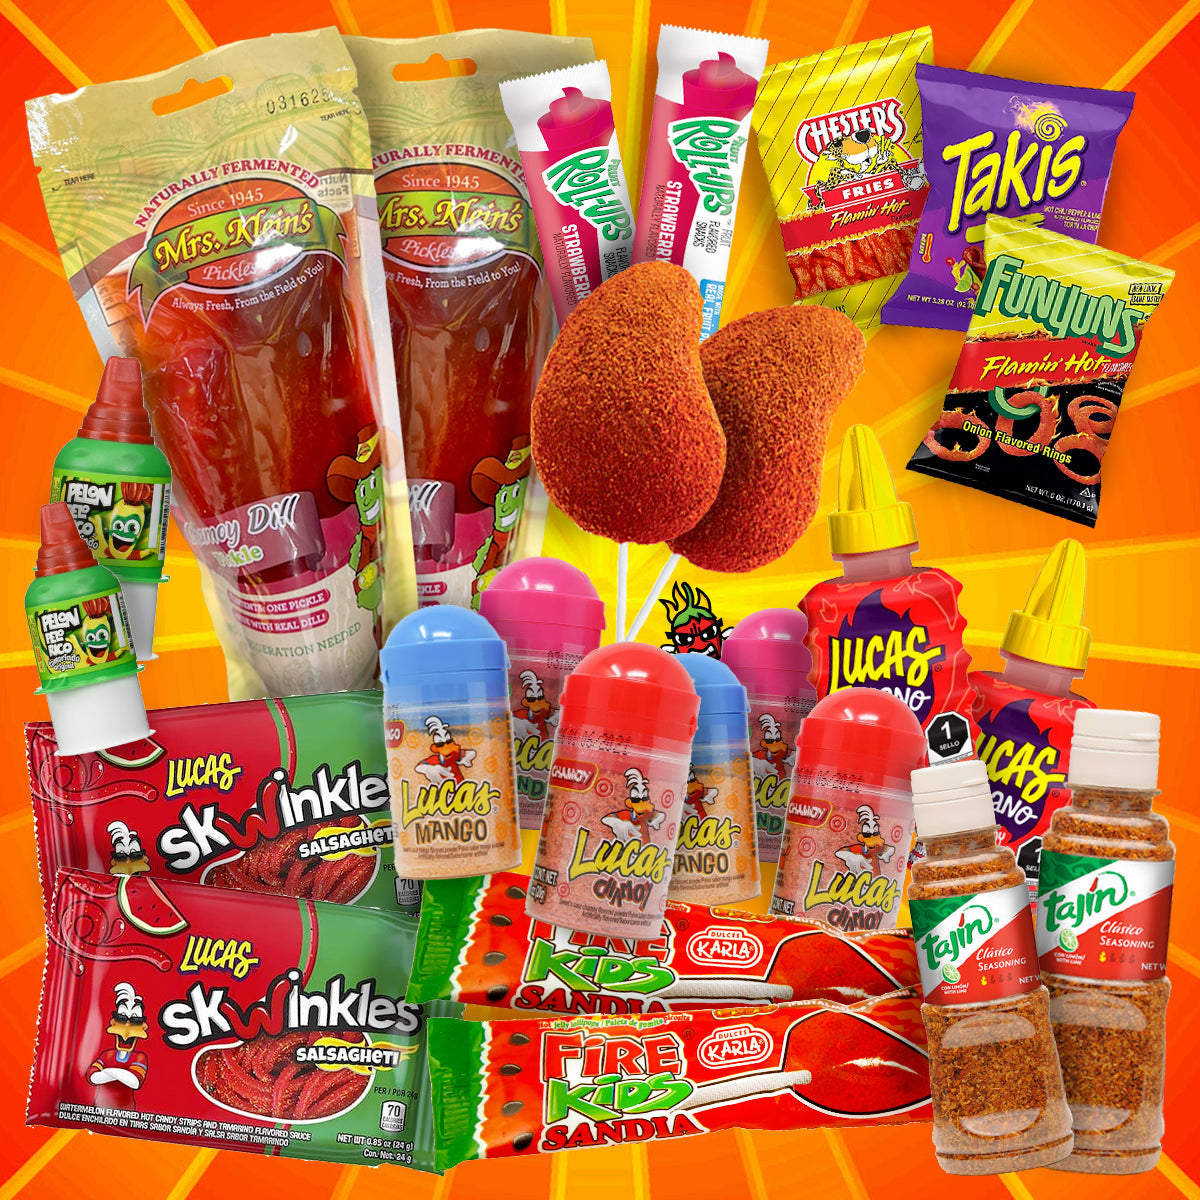 Chili Treats Spicy Pickle Kit Bundle with Over 30 Items